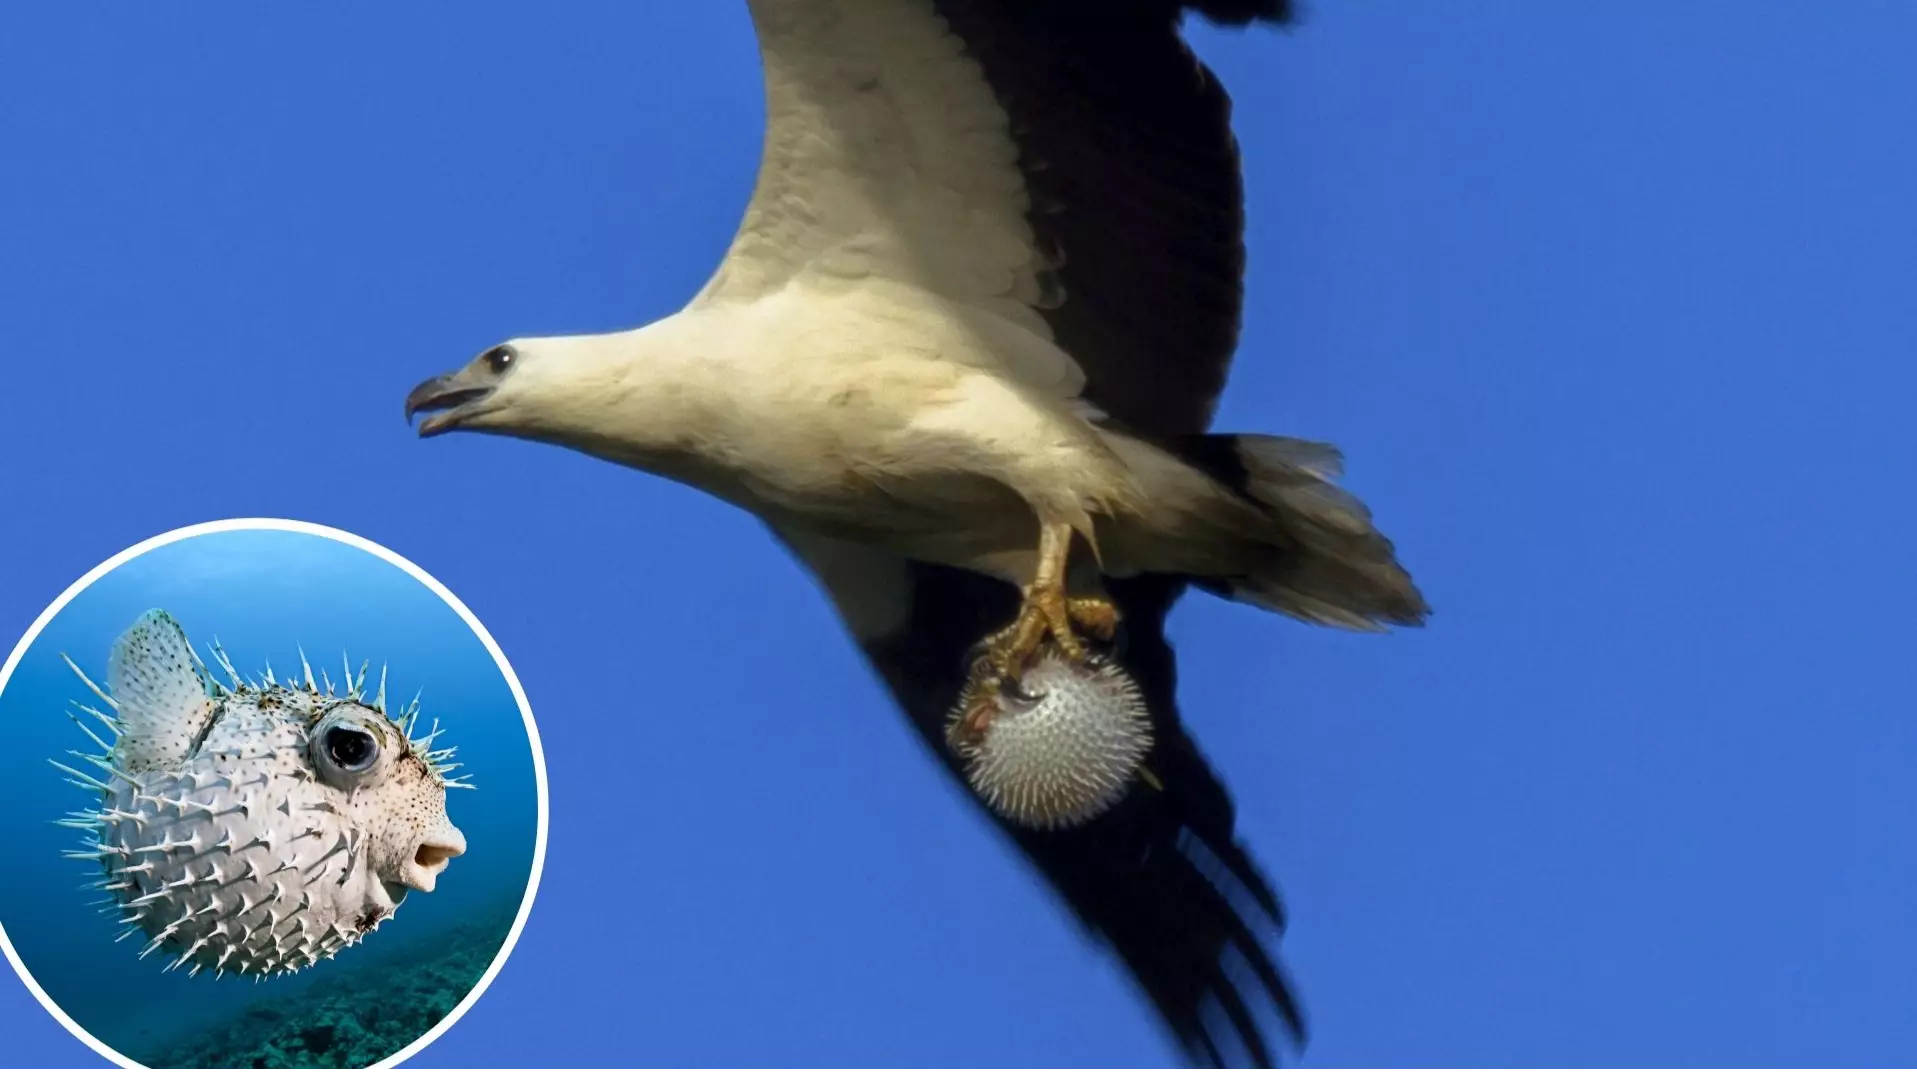 Sea Eagle Catches And Flies Off With Fully Inflated Puffer Fish